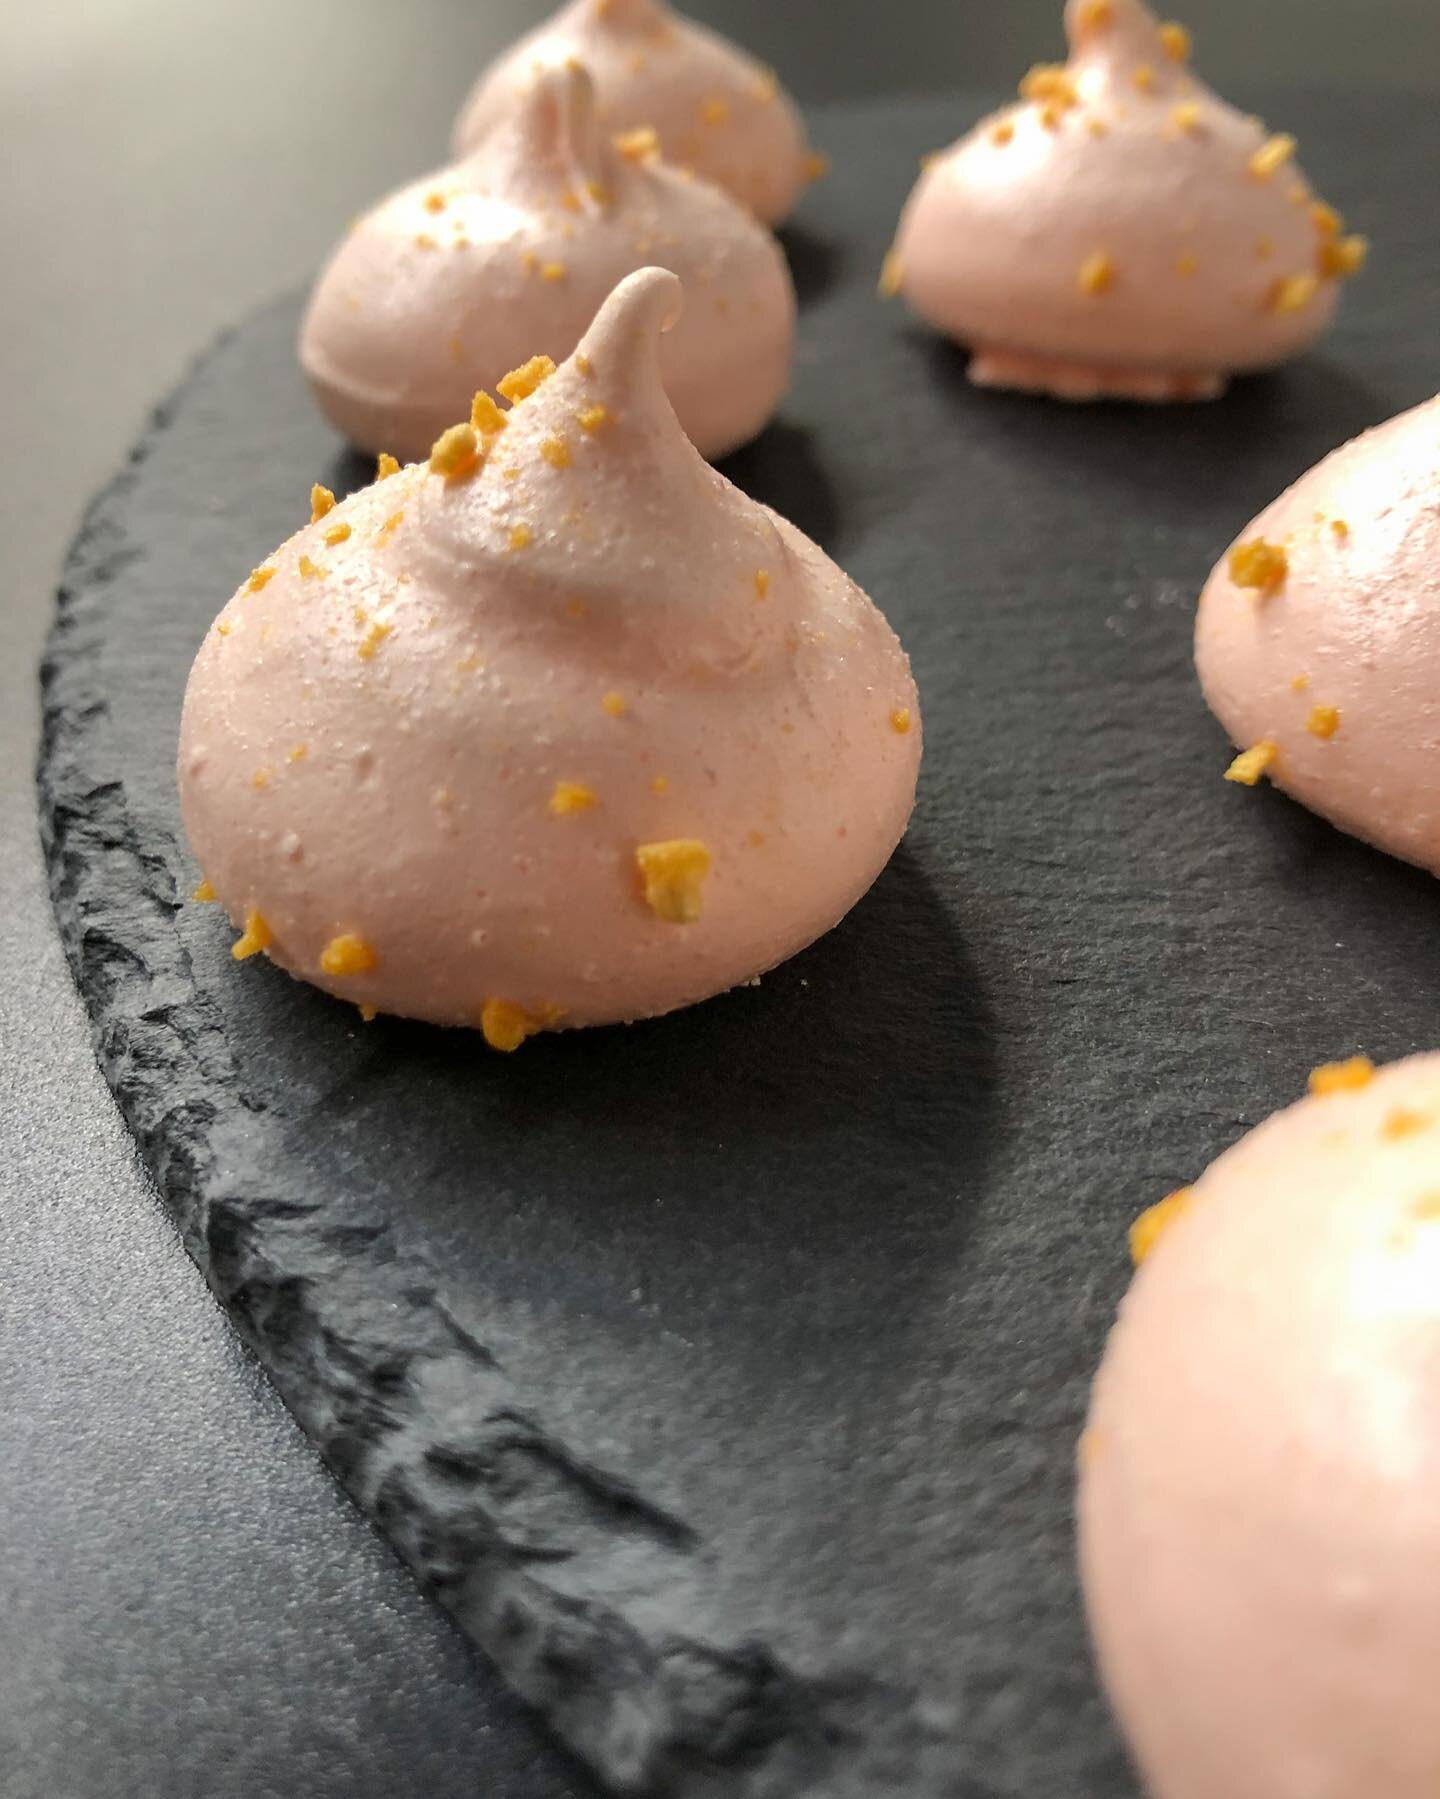 Our second spring meringue offering is Passionfruit! The balance of tart and sweet will leave you wanting more. Order through our bakeshop today!
.
.
.
#manalbashir #passionfruit #springflavours #torontopastry
📸 @danialarifrauf